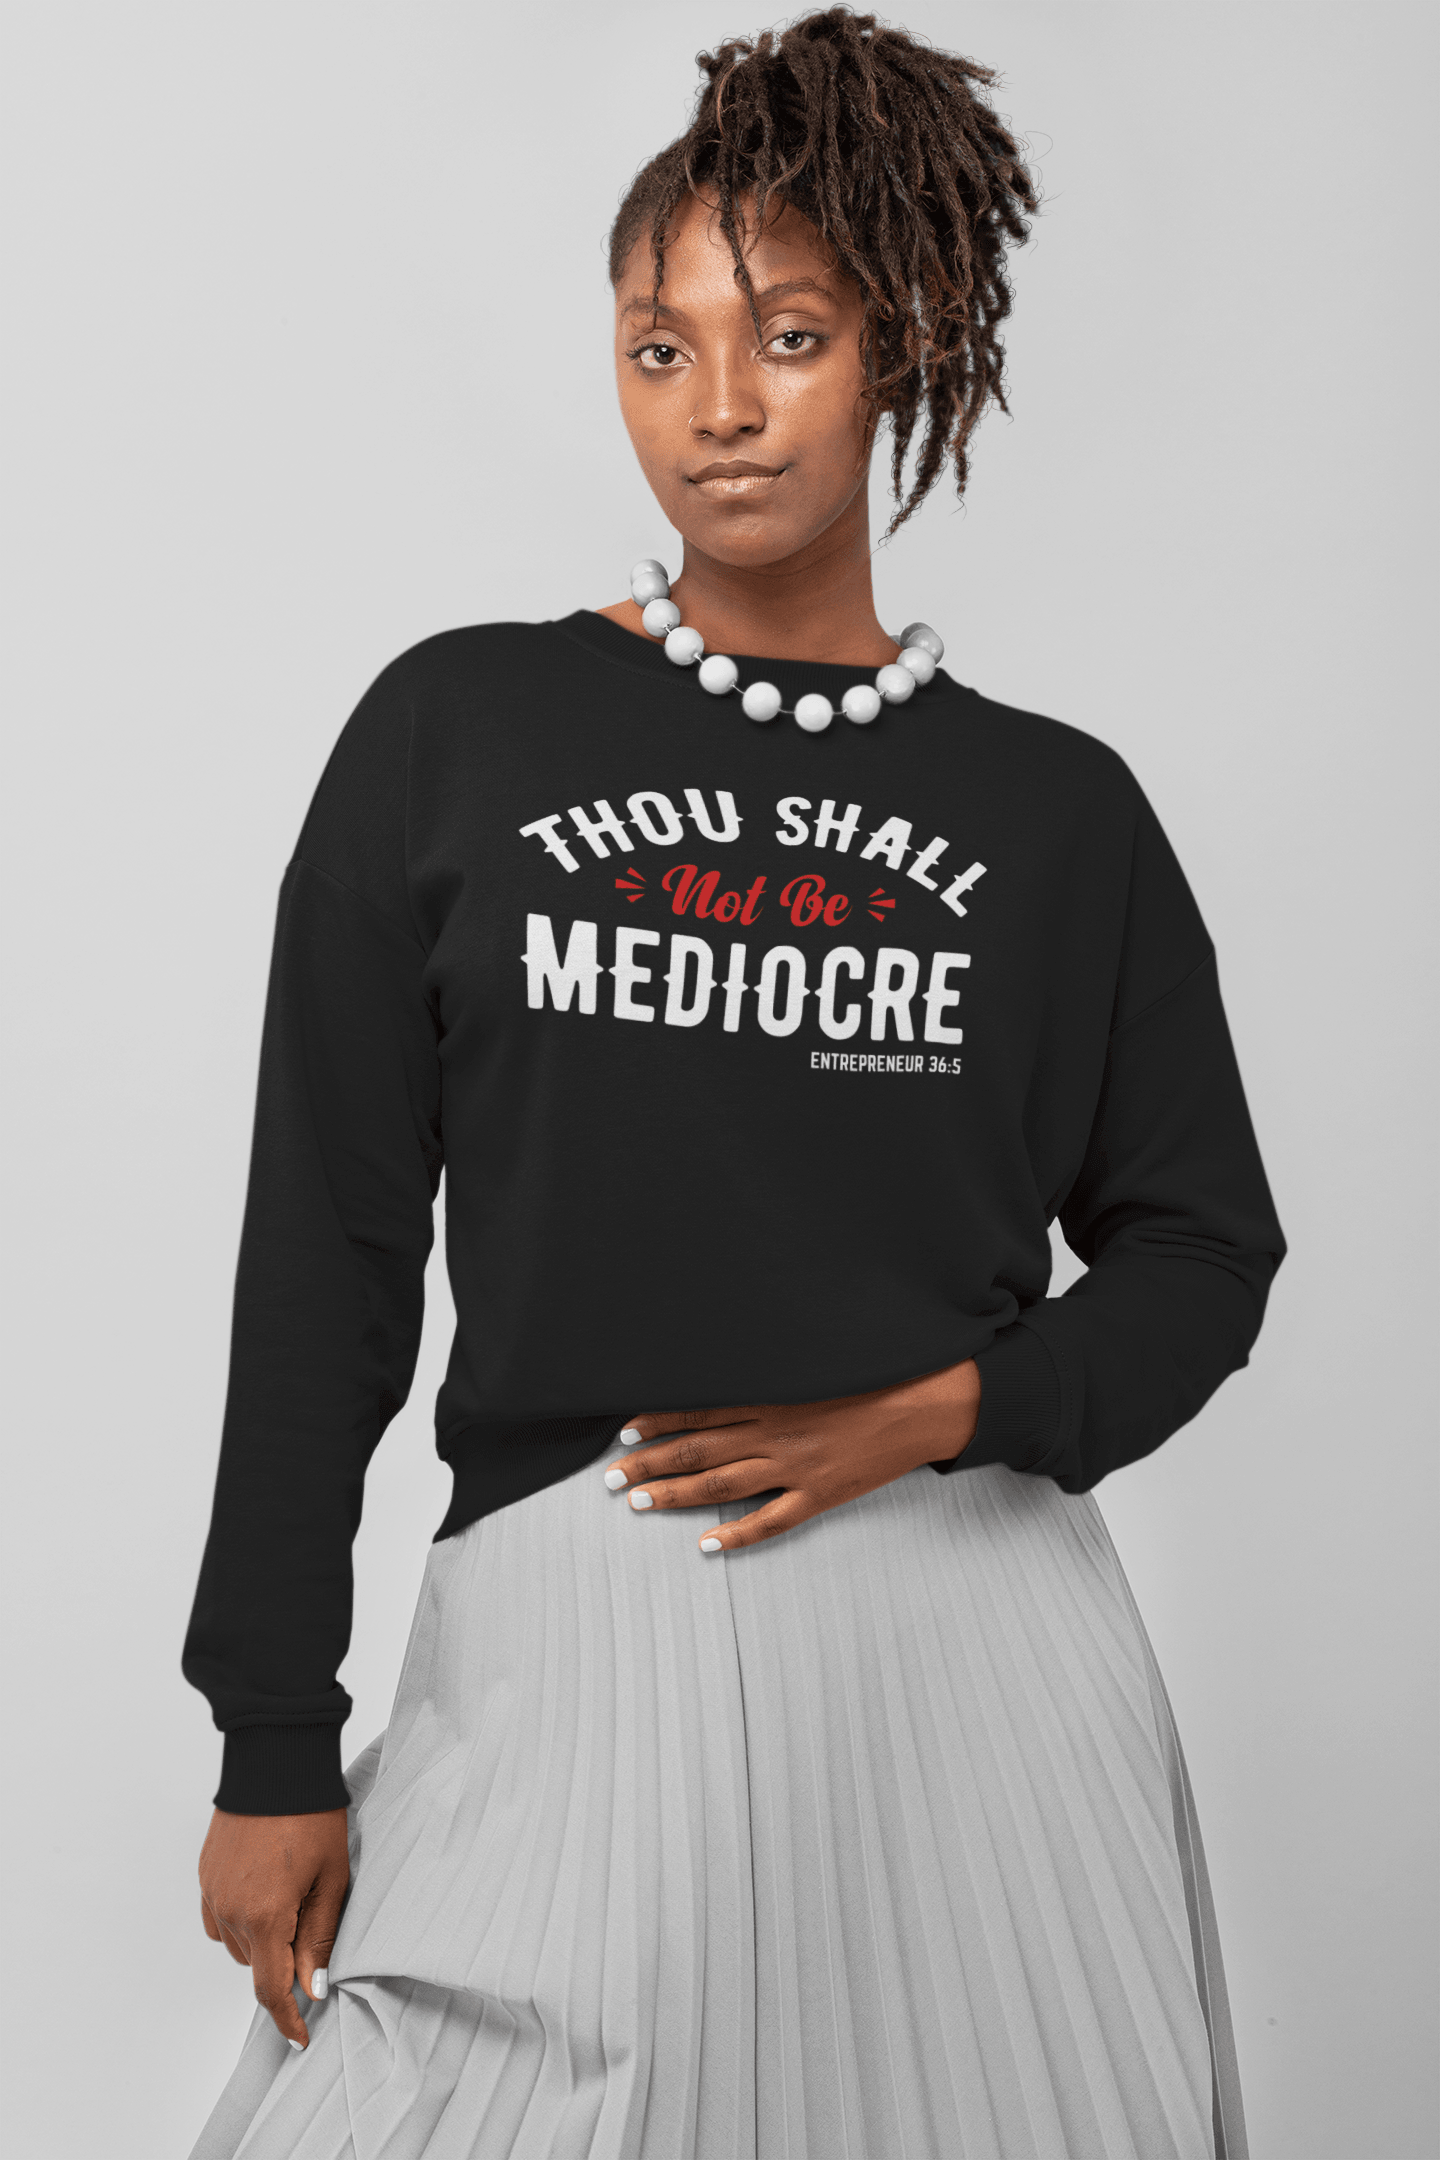 Thou Shall Not Be Mediocre Sweatshirt - Sharp Tact Kreativ | Tees & Gifts with Encouraging Messages to Brighten Your Day with a Bit of Wit